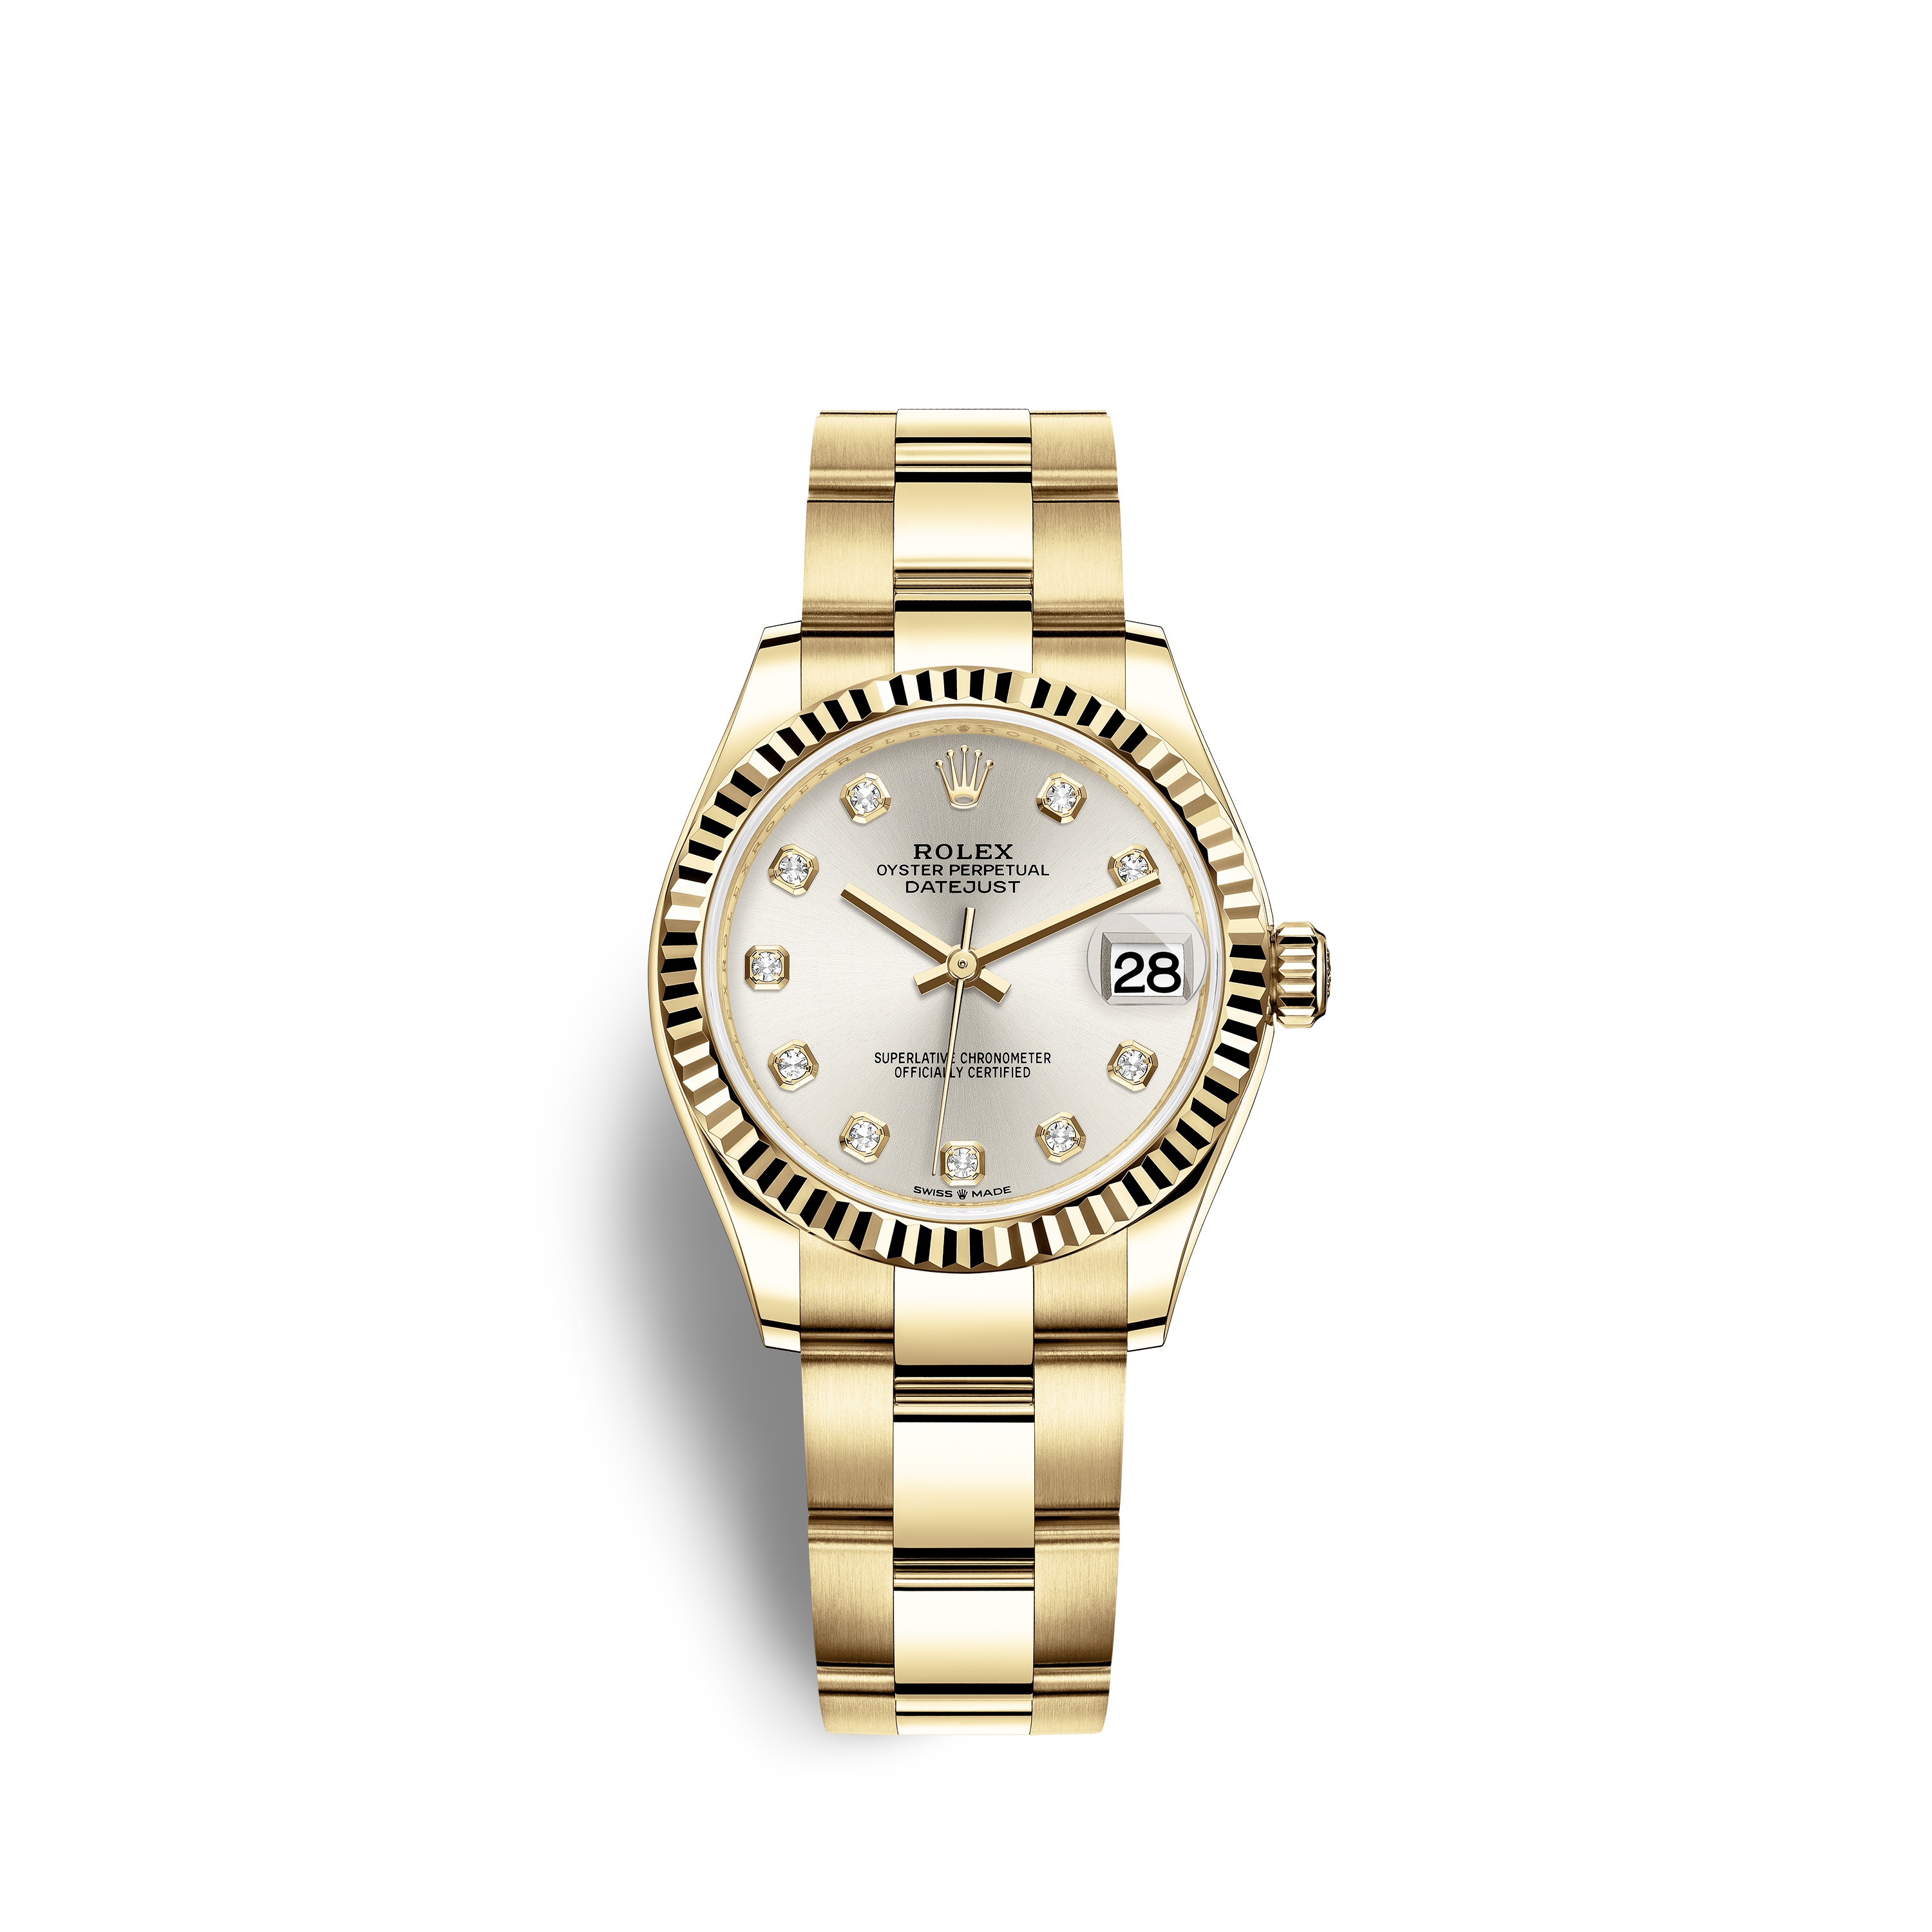 Datejust 31 278278 Gold Watch (Silver Set with Diamonds)